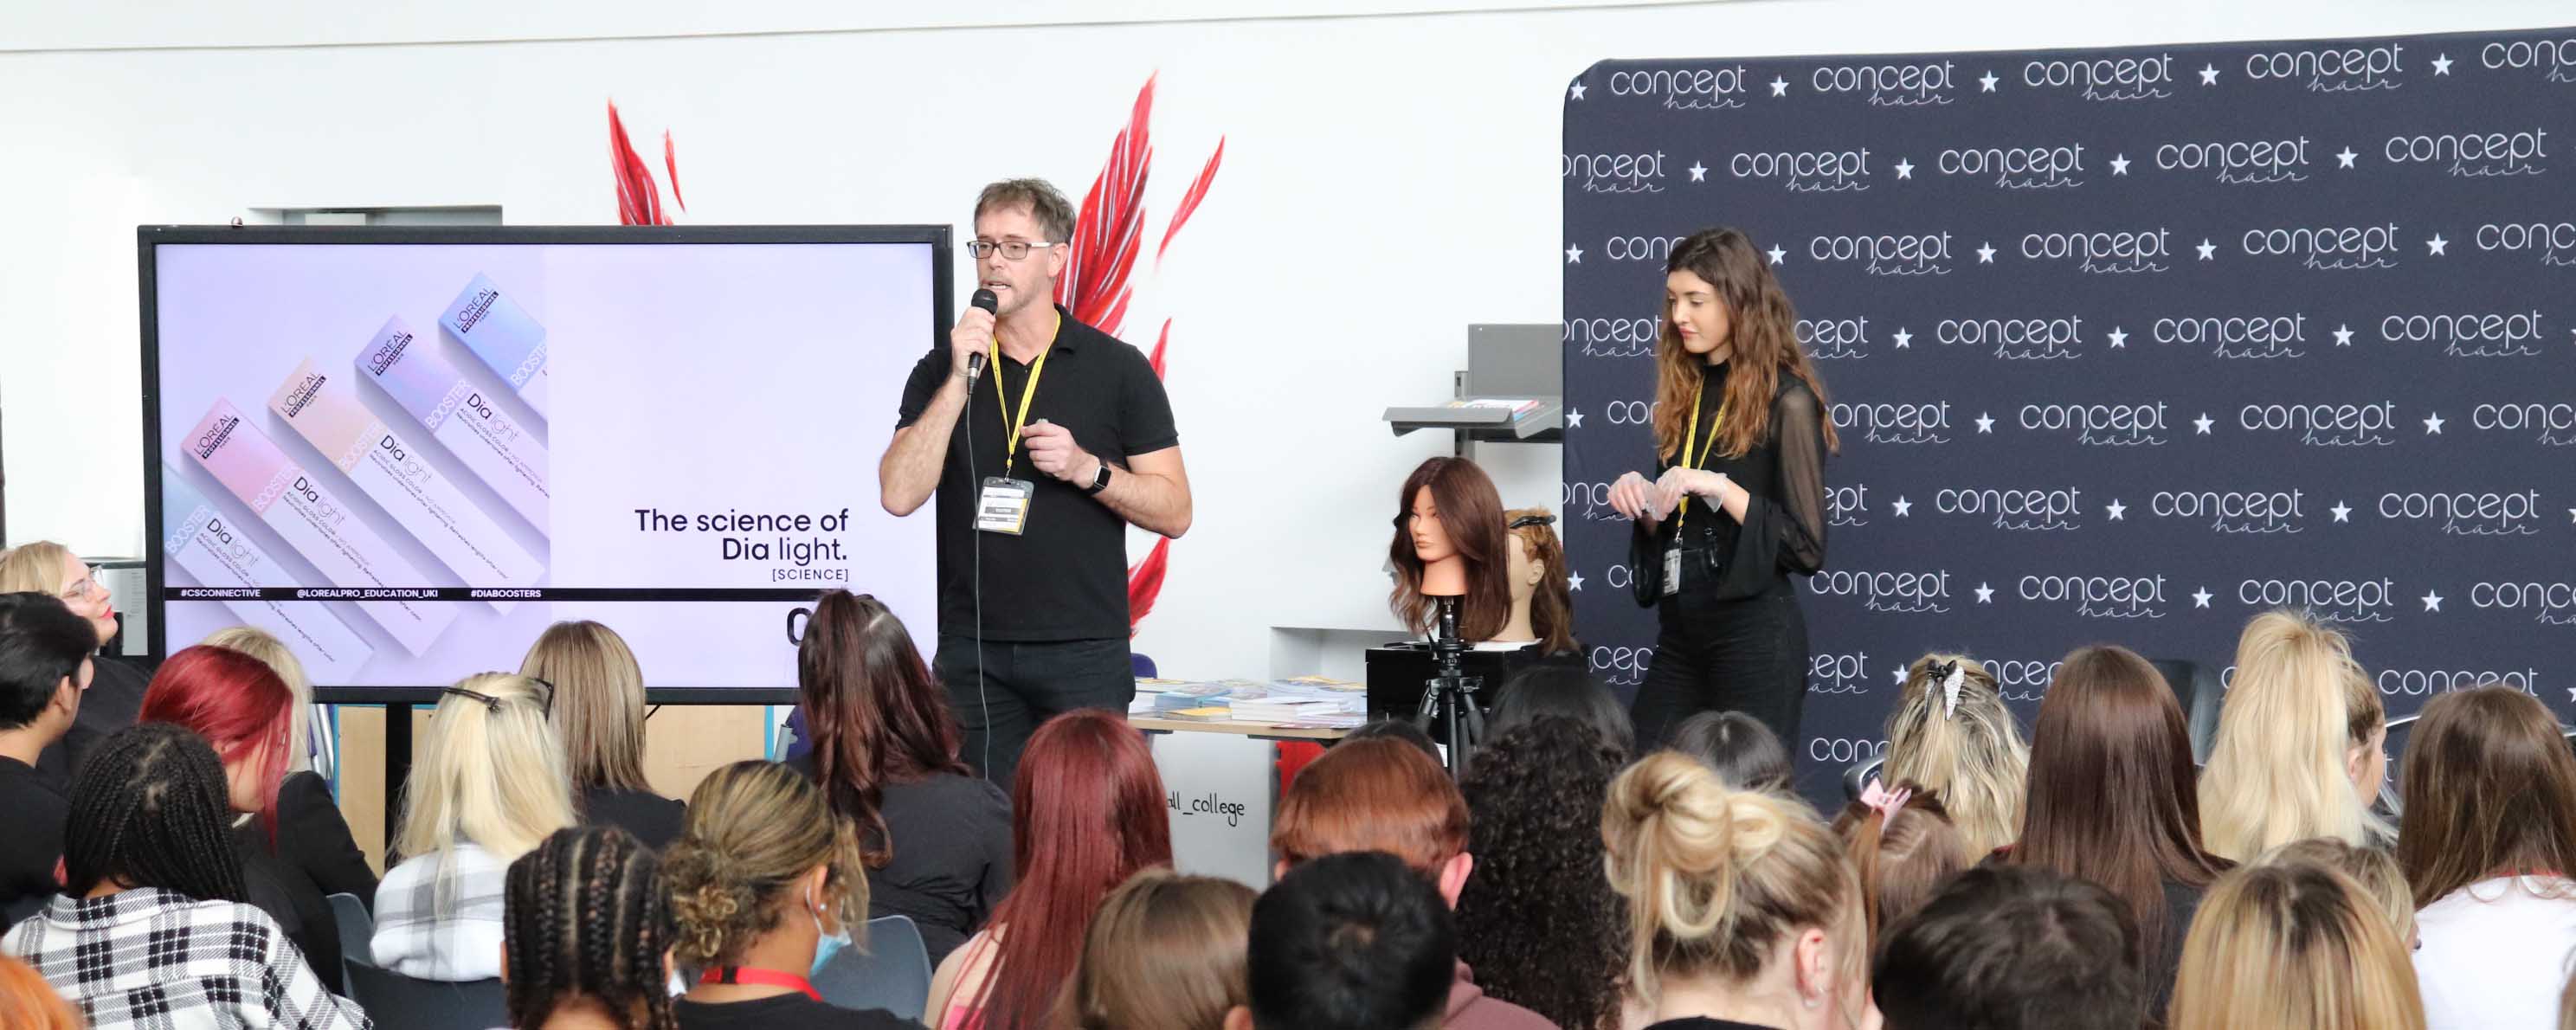 Concept Hair roadshow representative on stage addressing audience